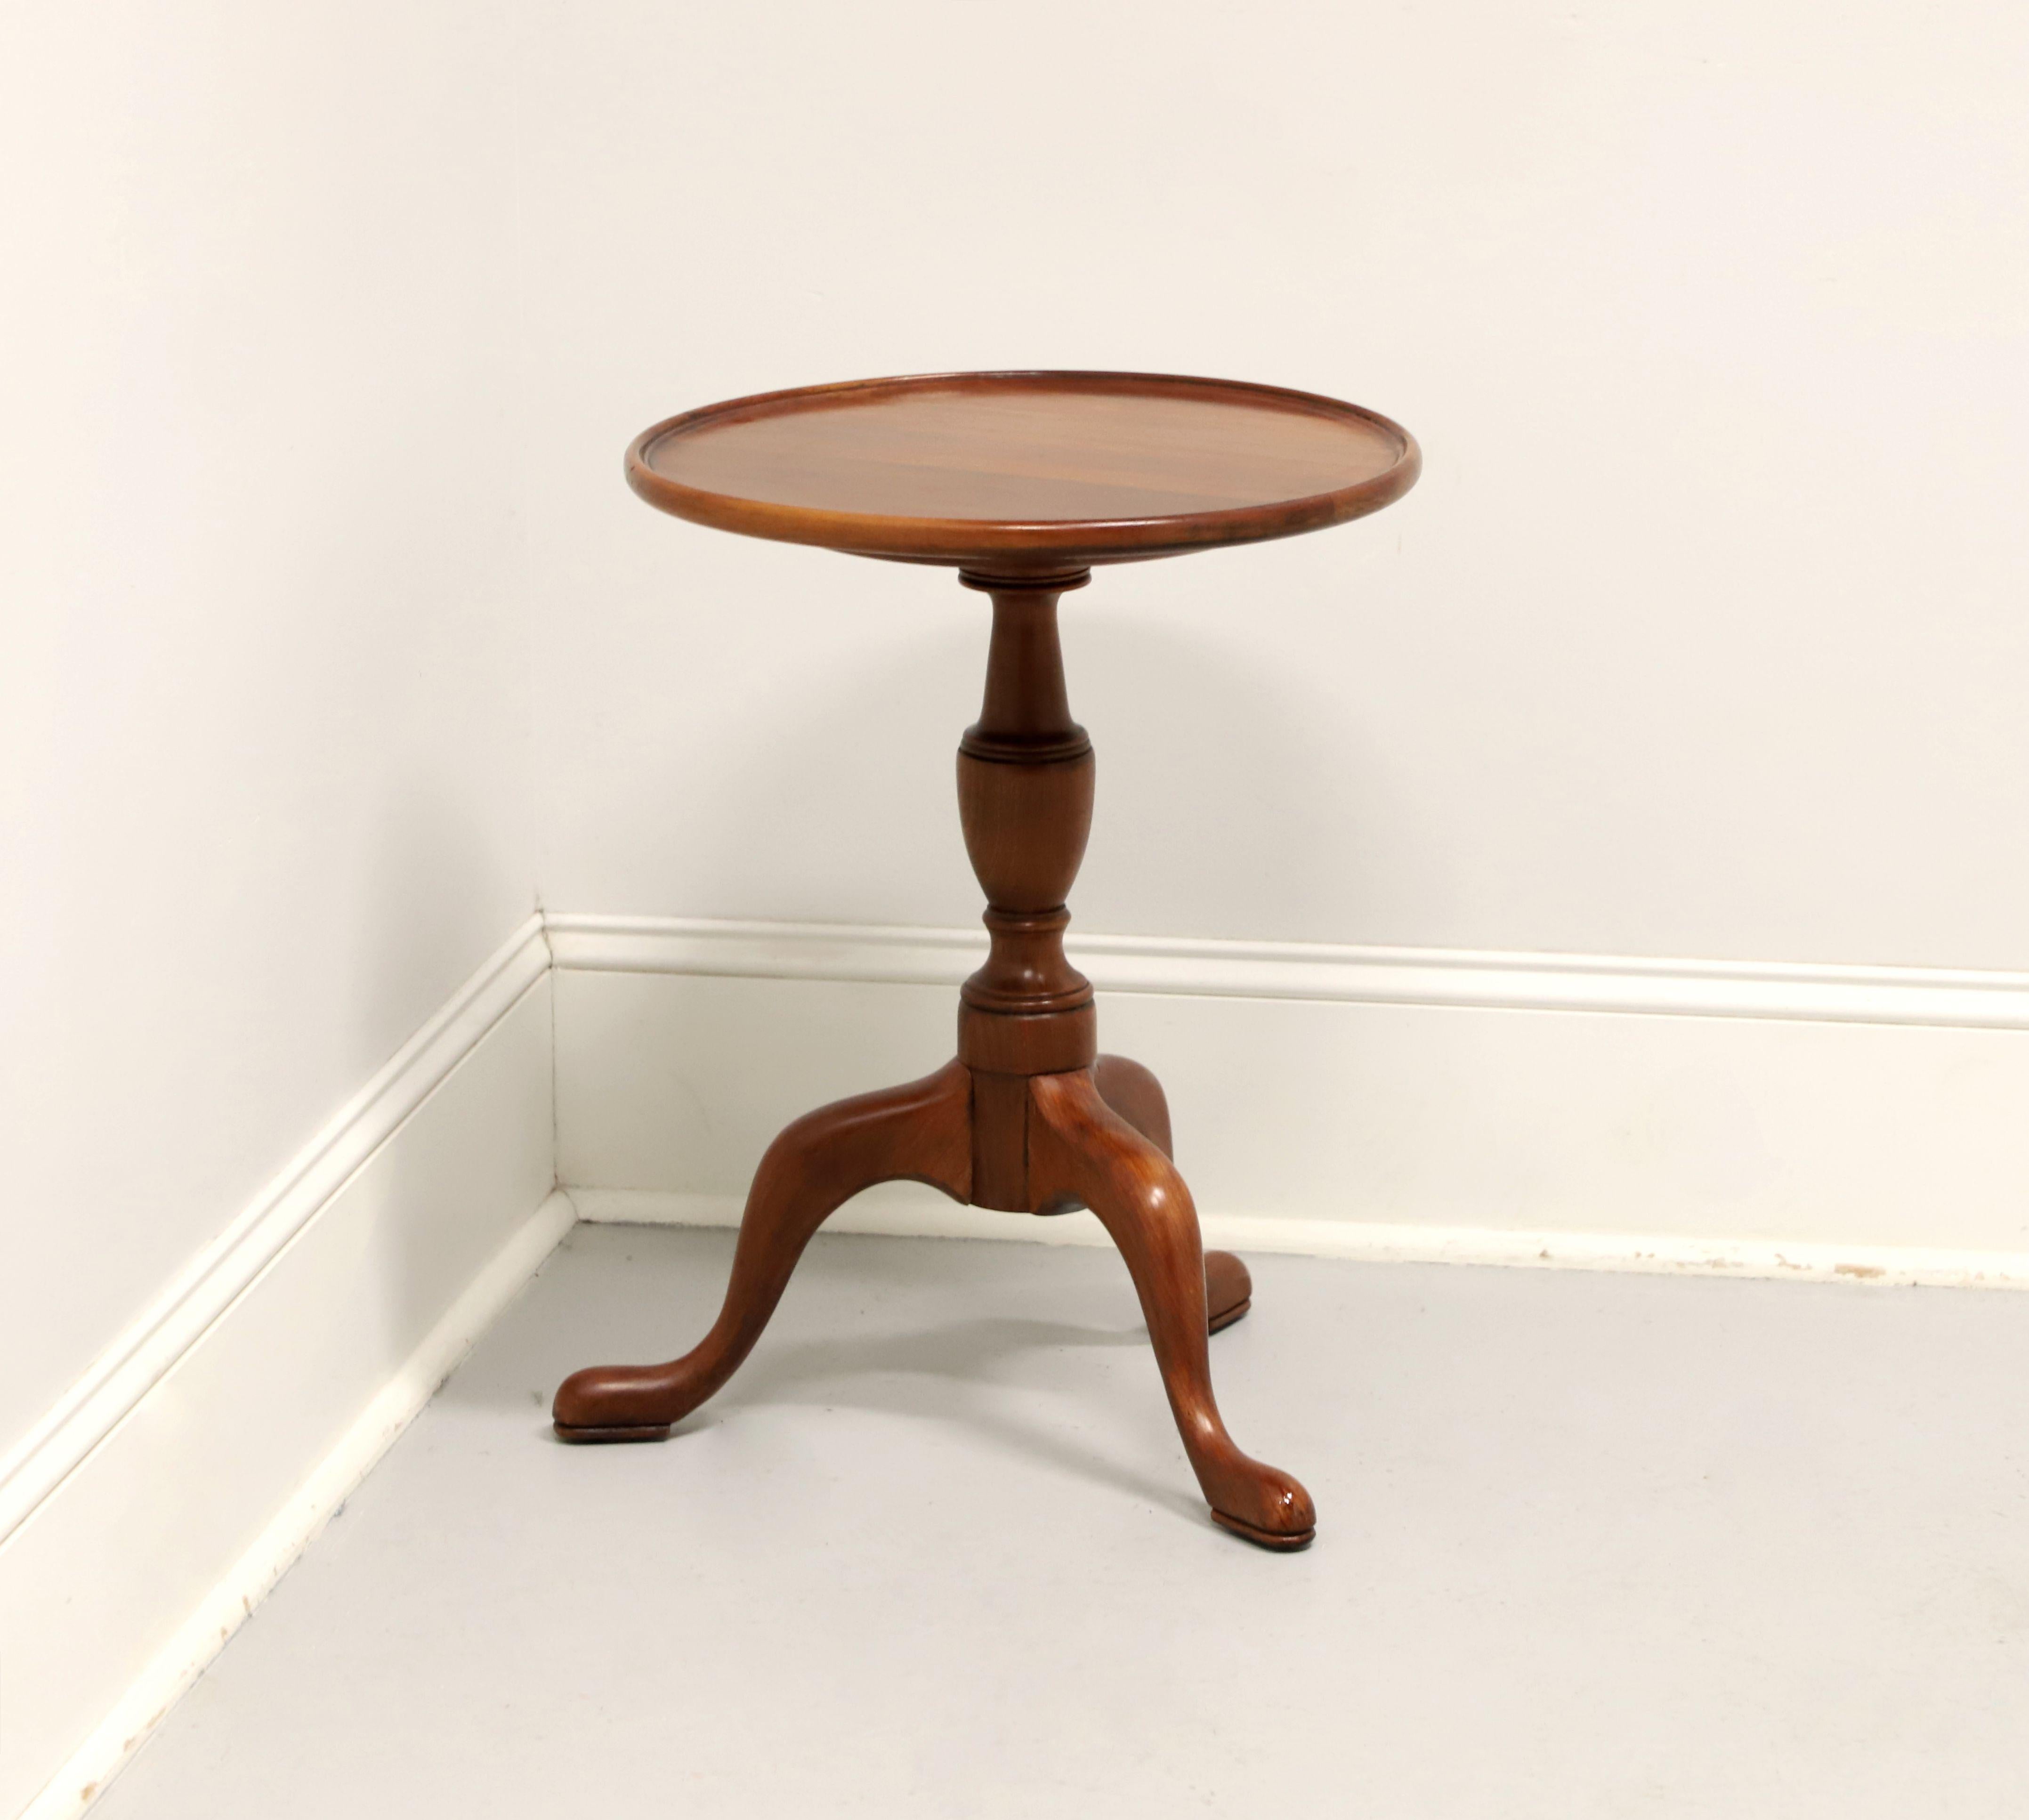 A Georgian style round brandy stand / candle stand by Henkel Harris, of Winchester, Virginia, USA. Solid wild black cherry wood with round raised lip top, turned singular pedestal base, and three legs with pad feet. Made circa 1972.

Style #: 5607,